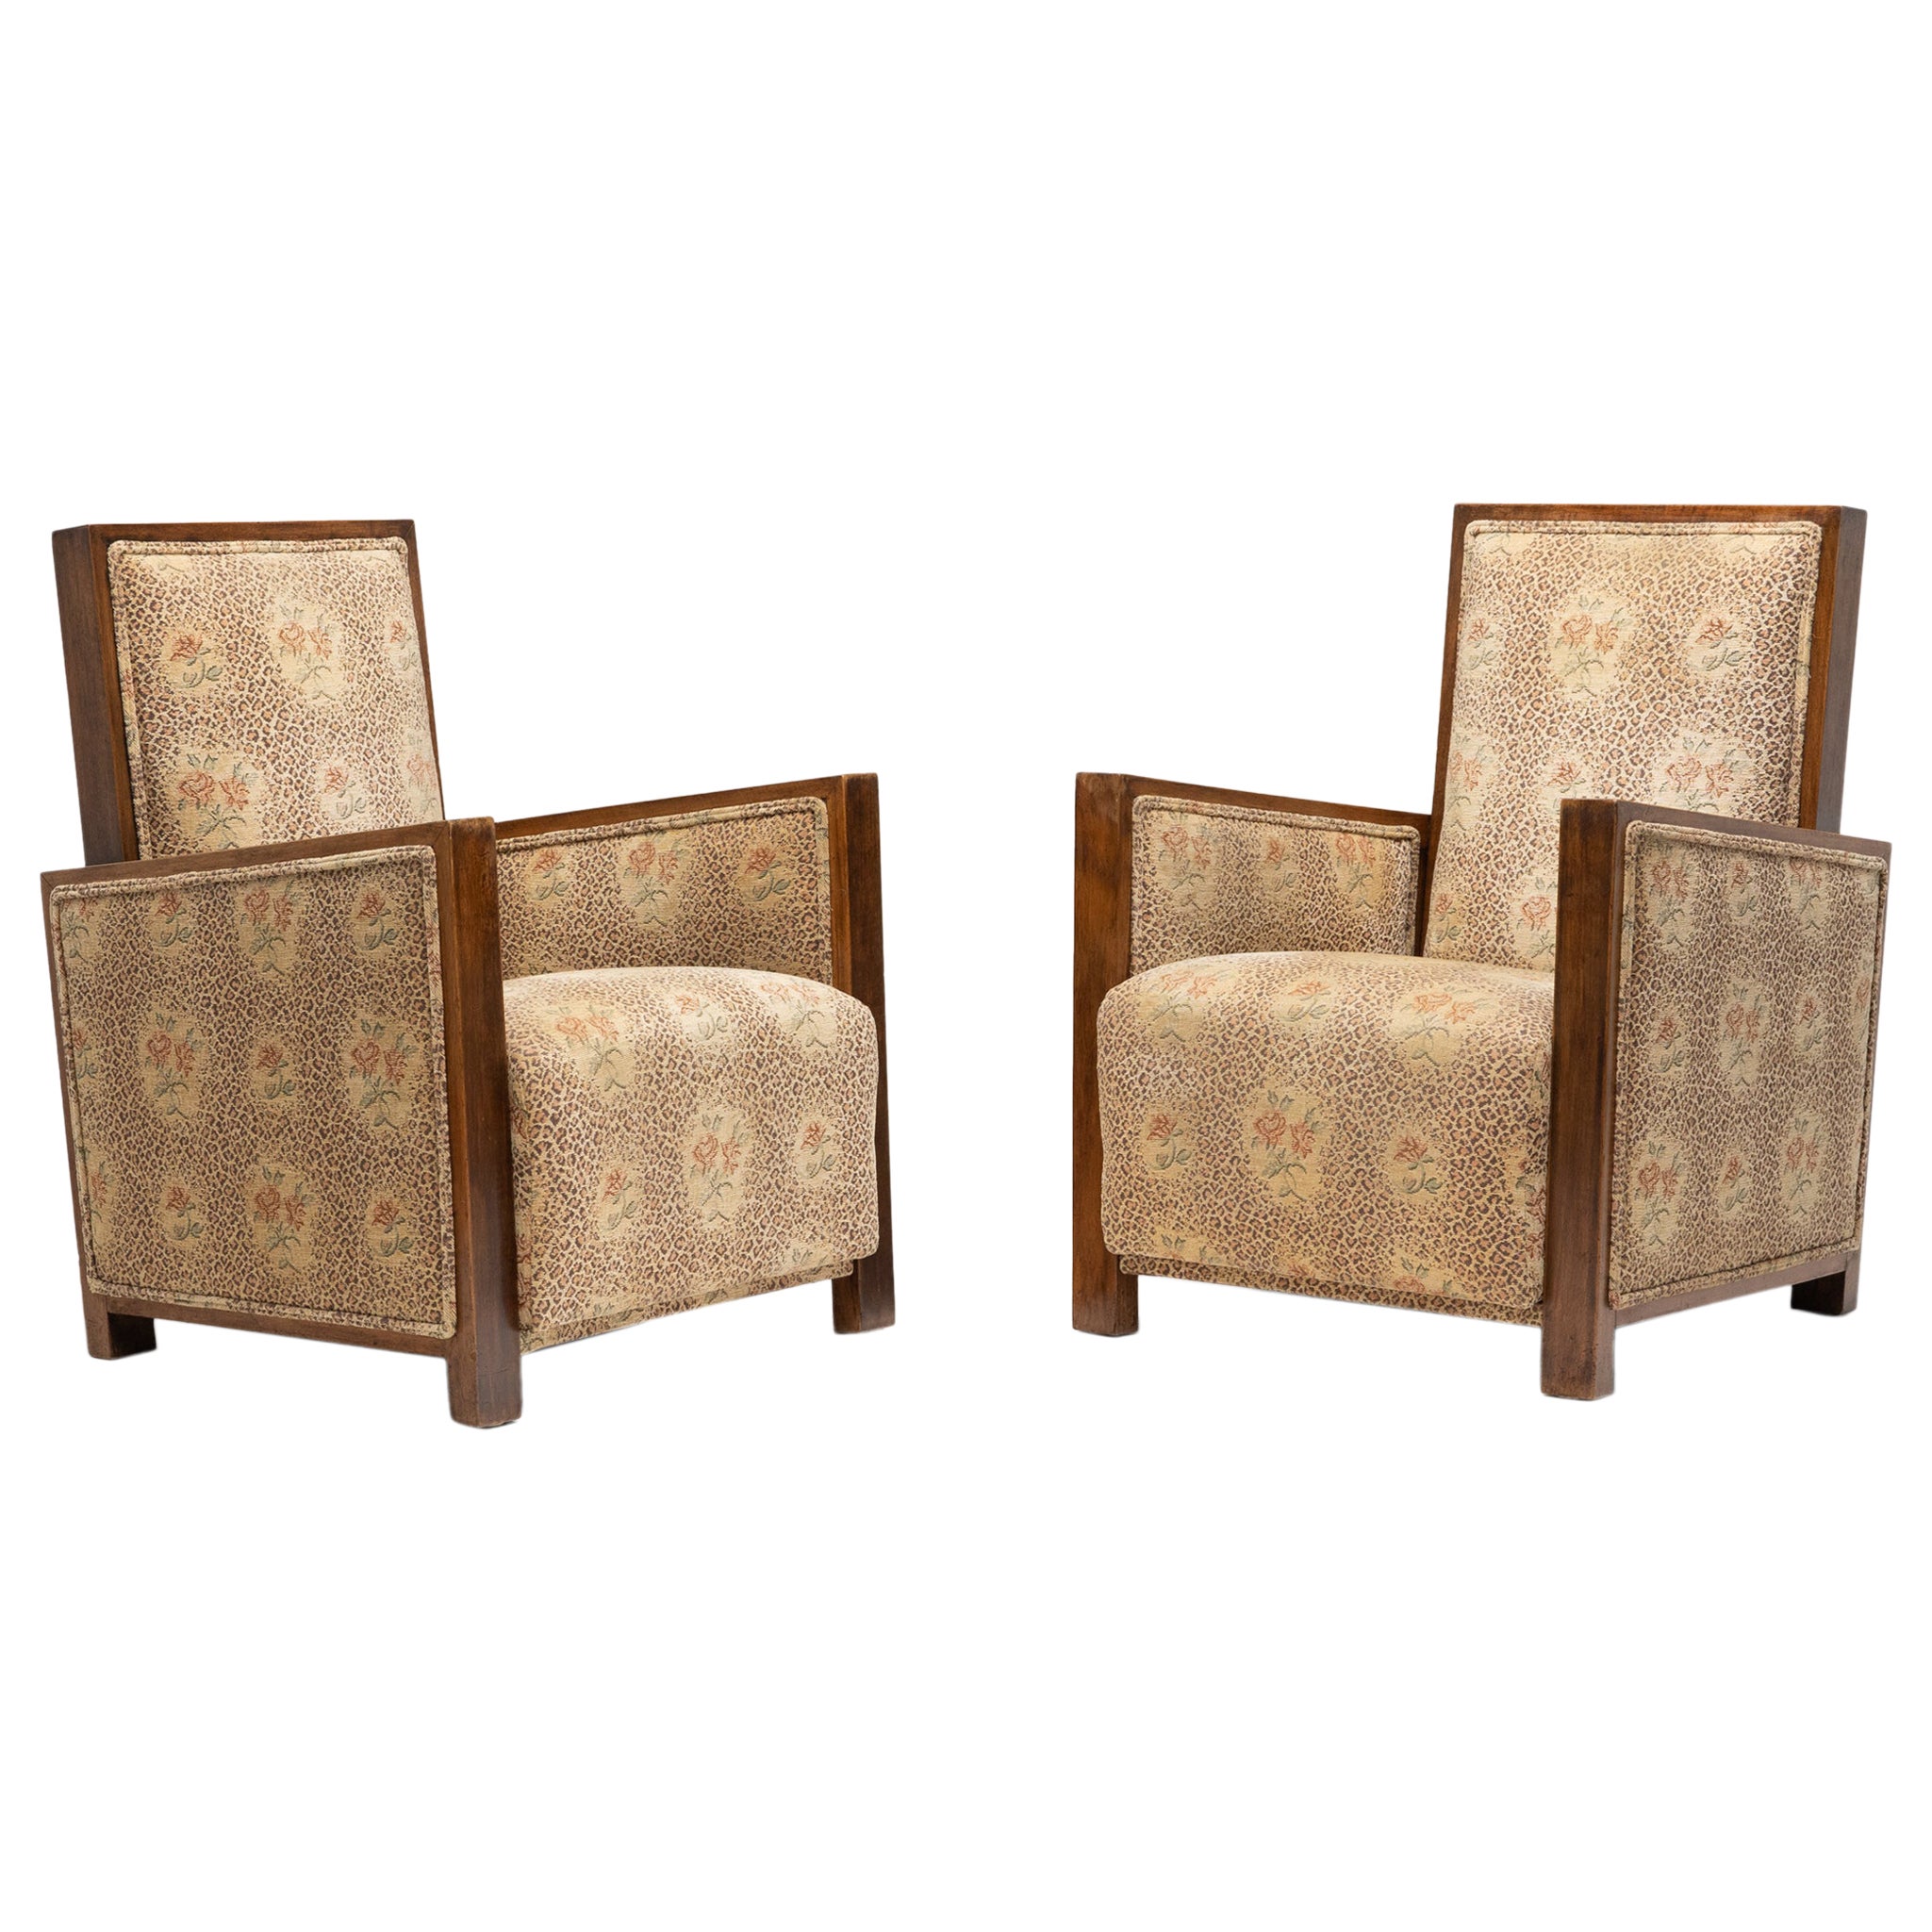 Pair of French Art Deco Armchairs, c. 1930 For Sale